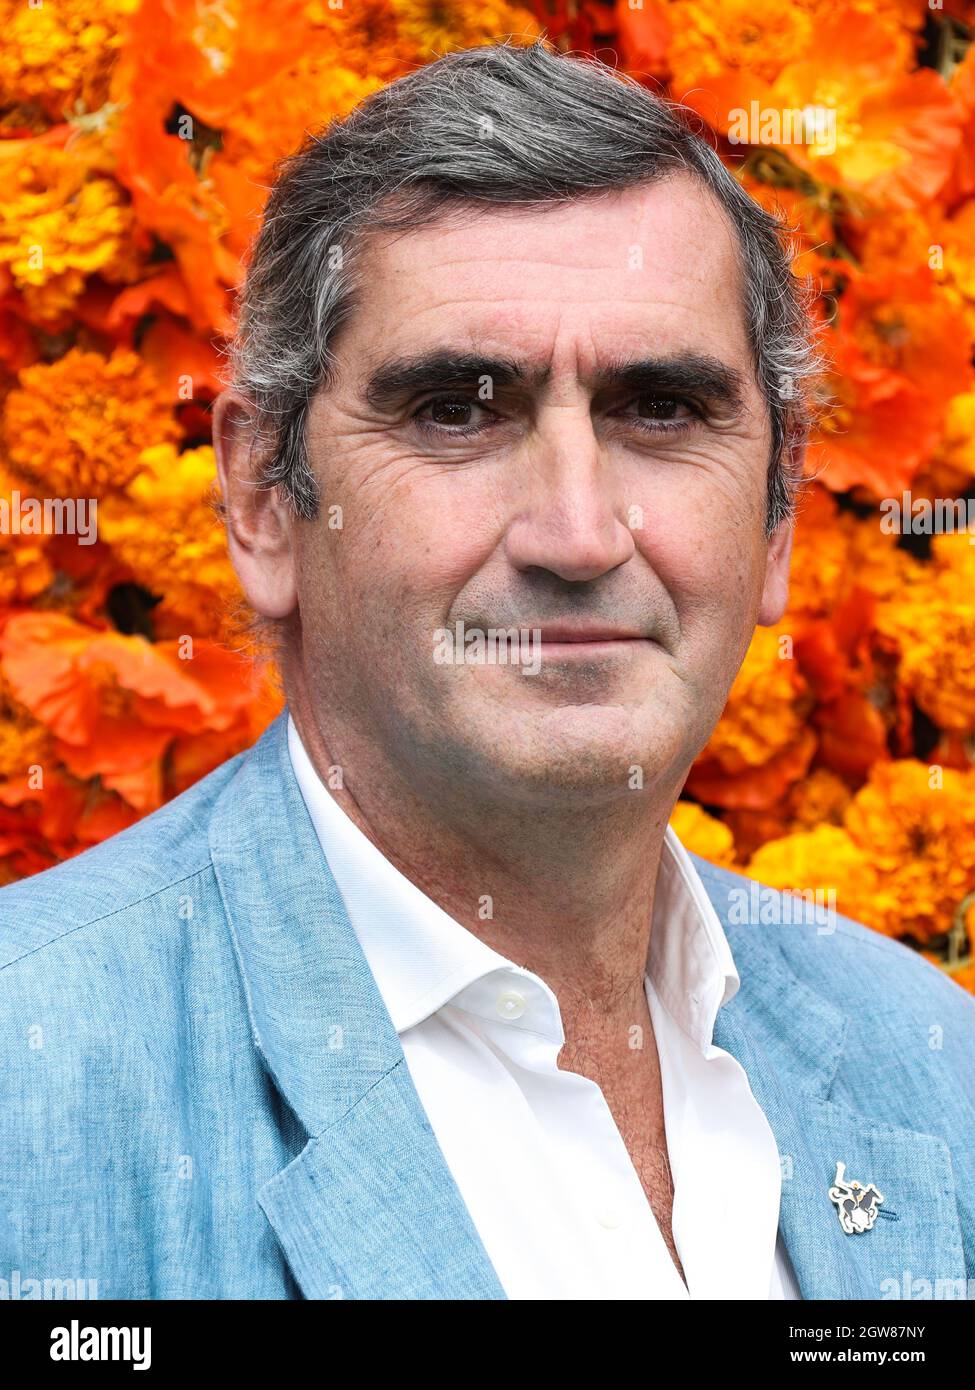 Jean marc gallot president hi-res stock photography and images - Alamy